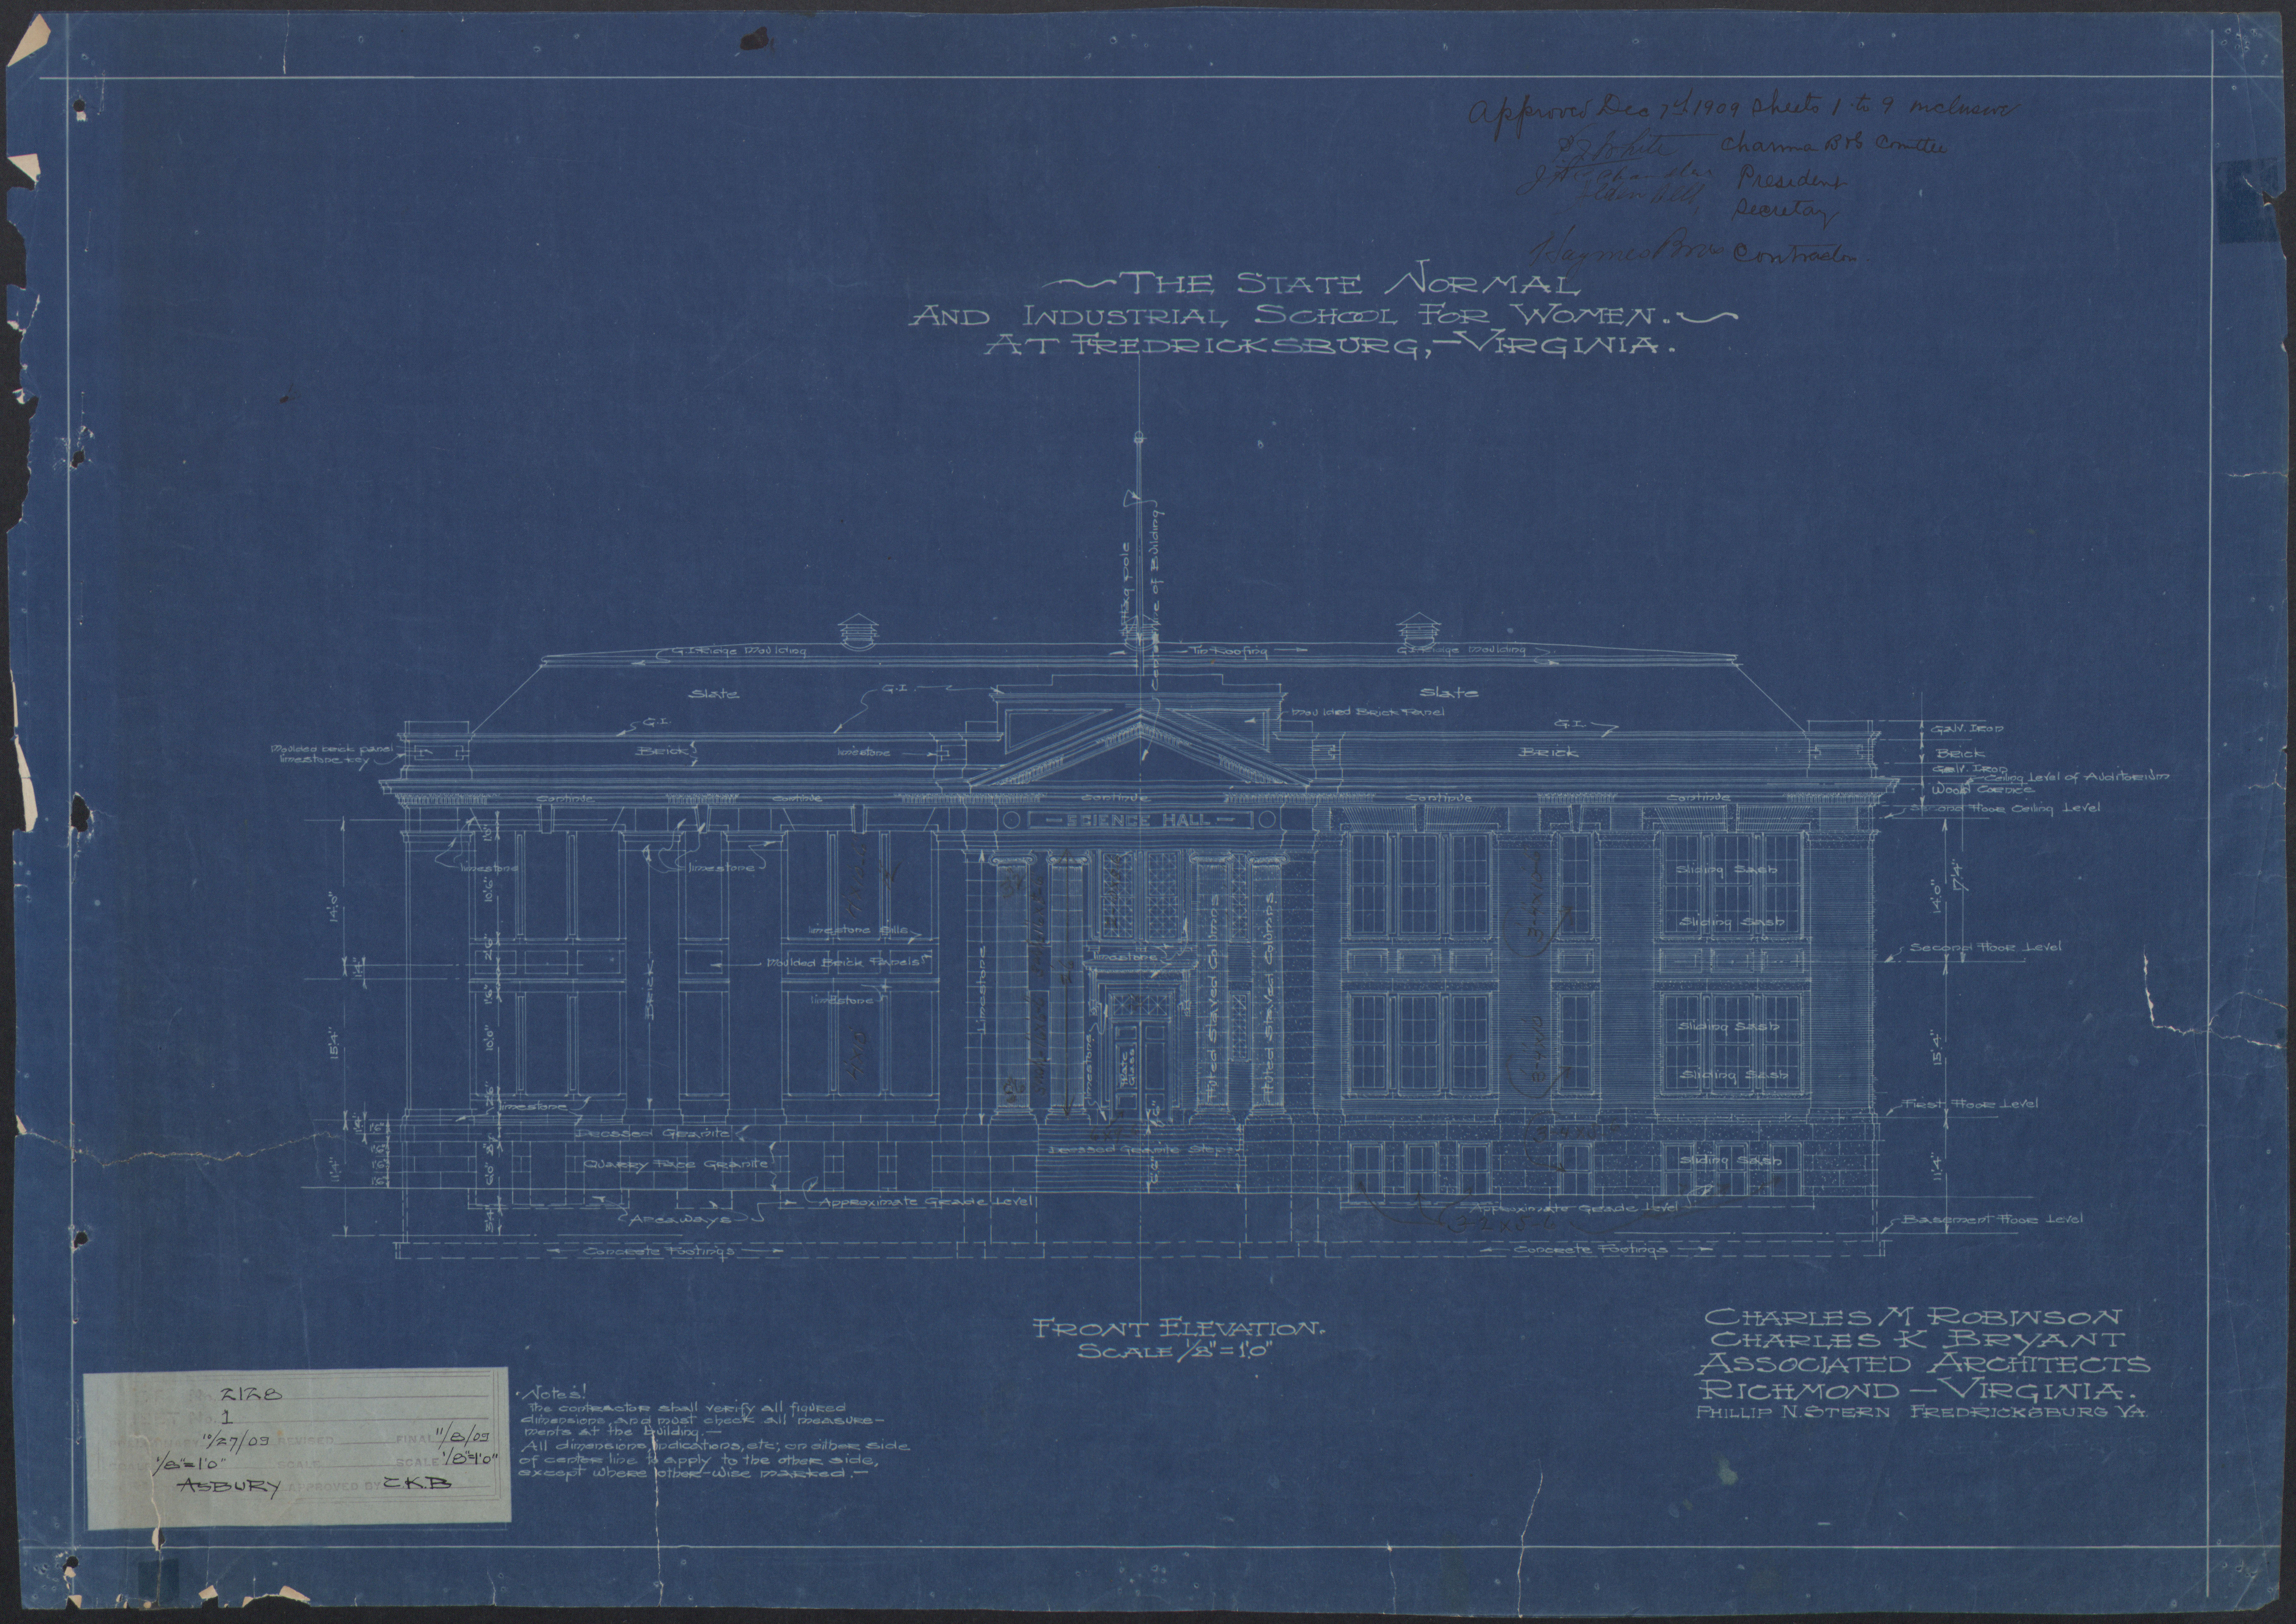 The cutline should be: Monroe Hall was the first academic building at the State Normal and Industrial School. This blueprint is from 1909. Courtesy of the University Archives.